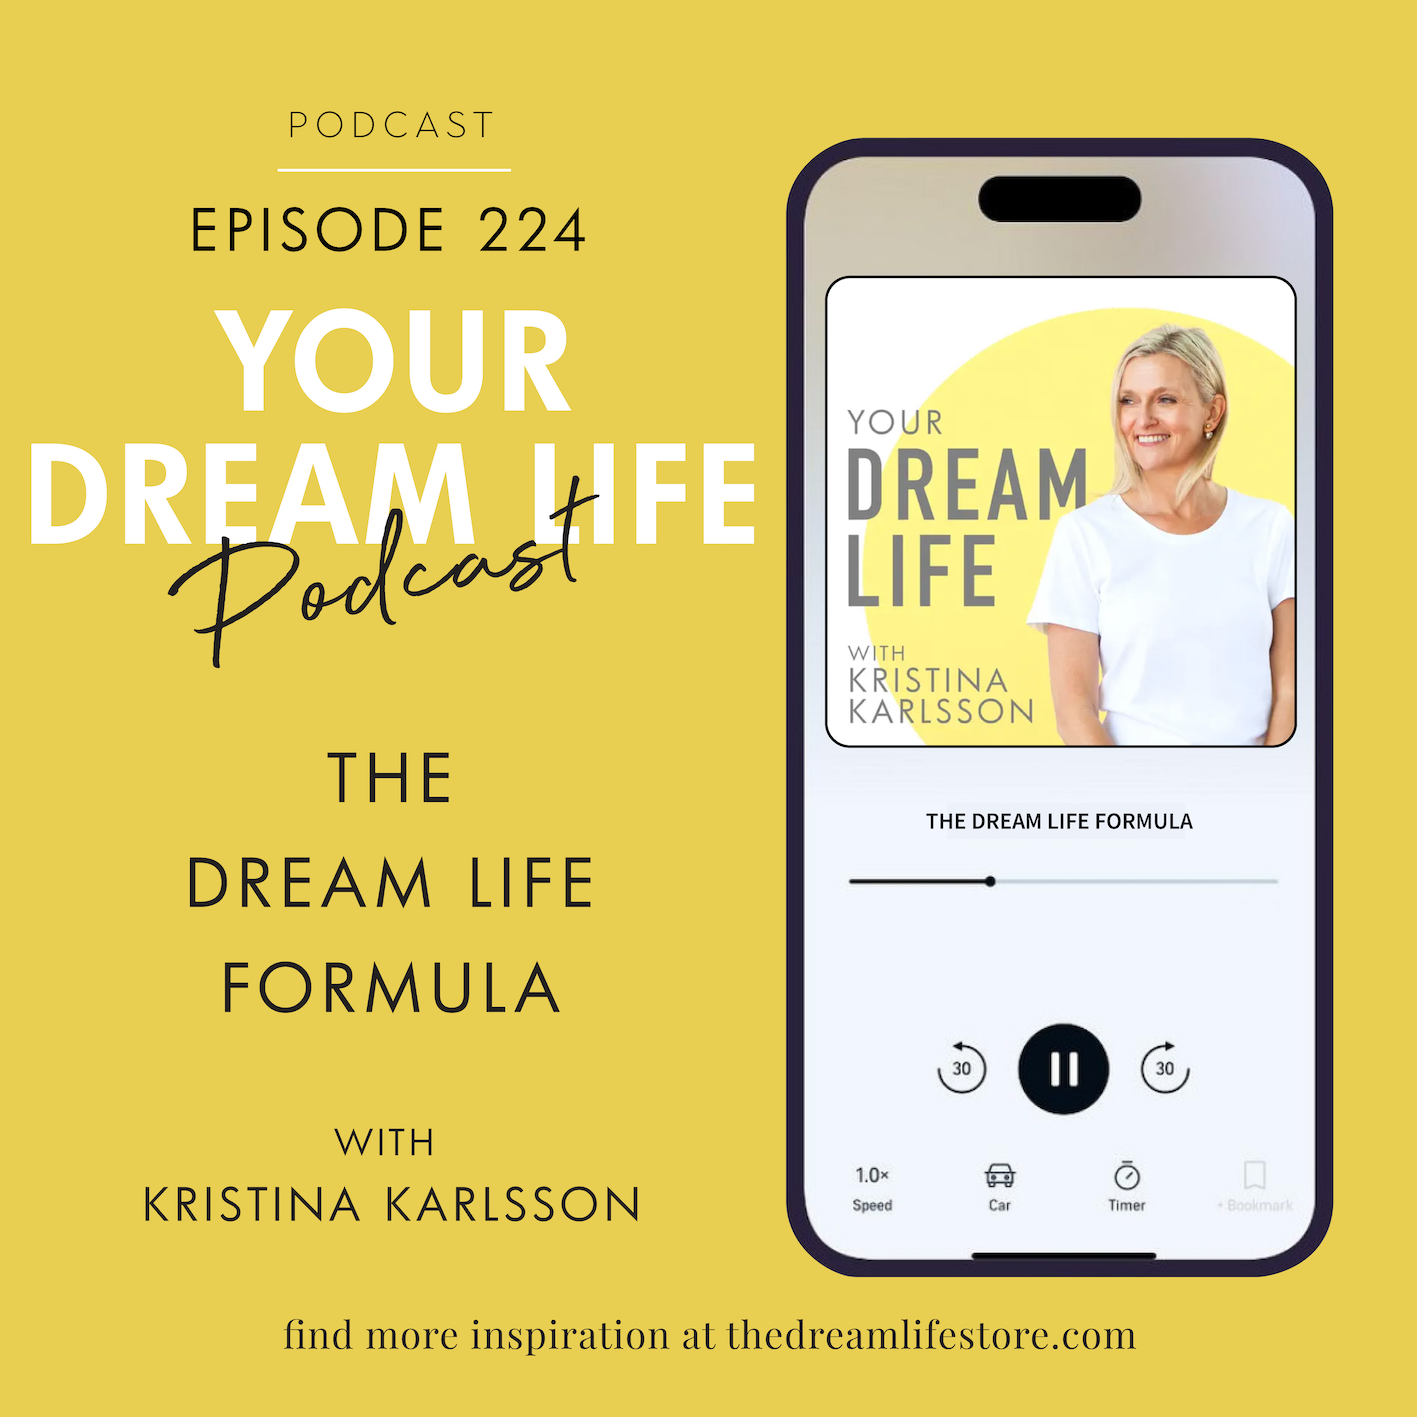 #224 - THE DREAM LIFE FORMULA: UNLOCK THE PATH TO YOUR DREAMS